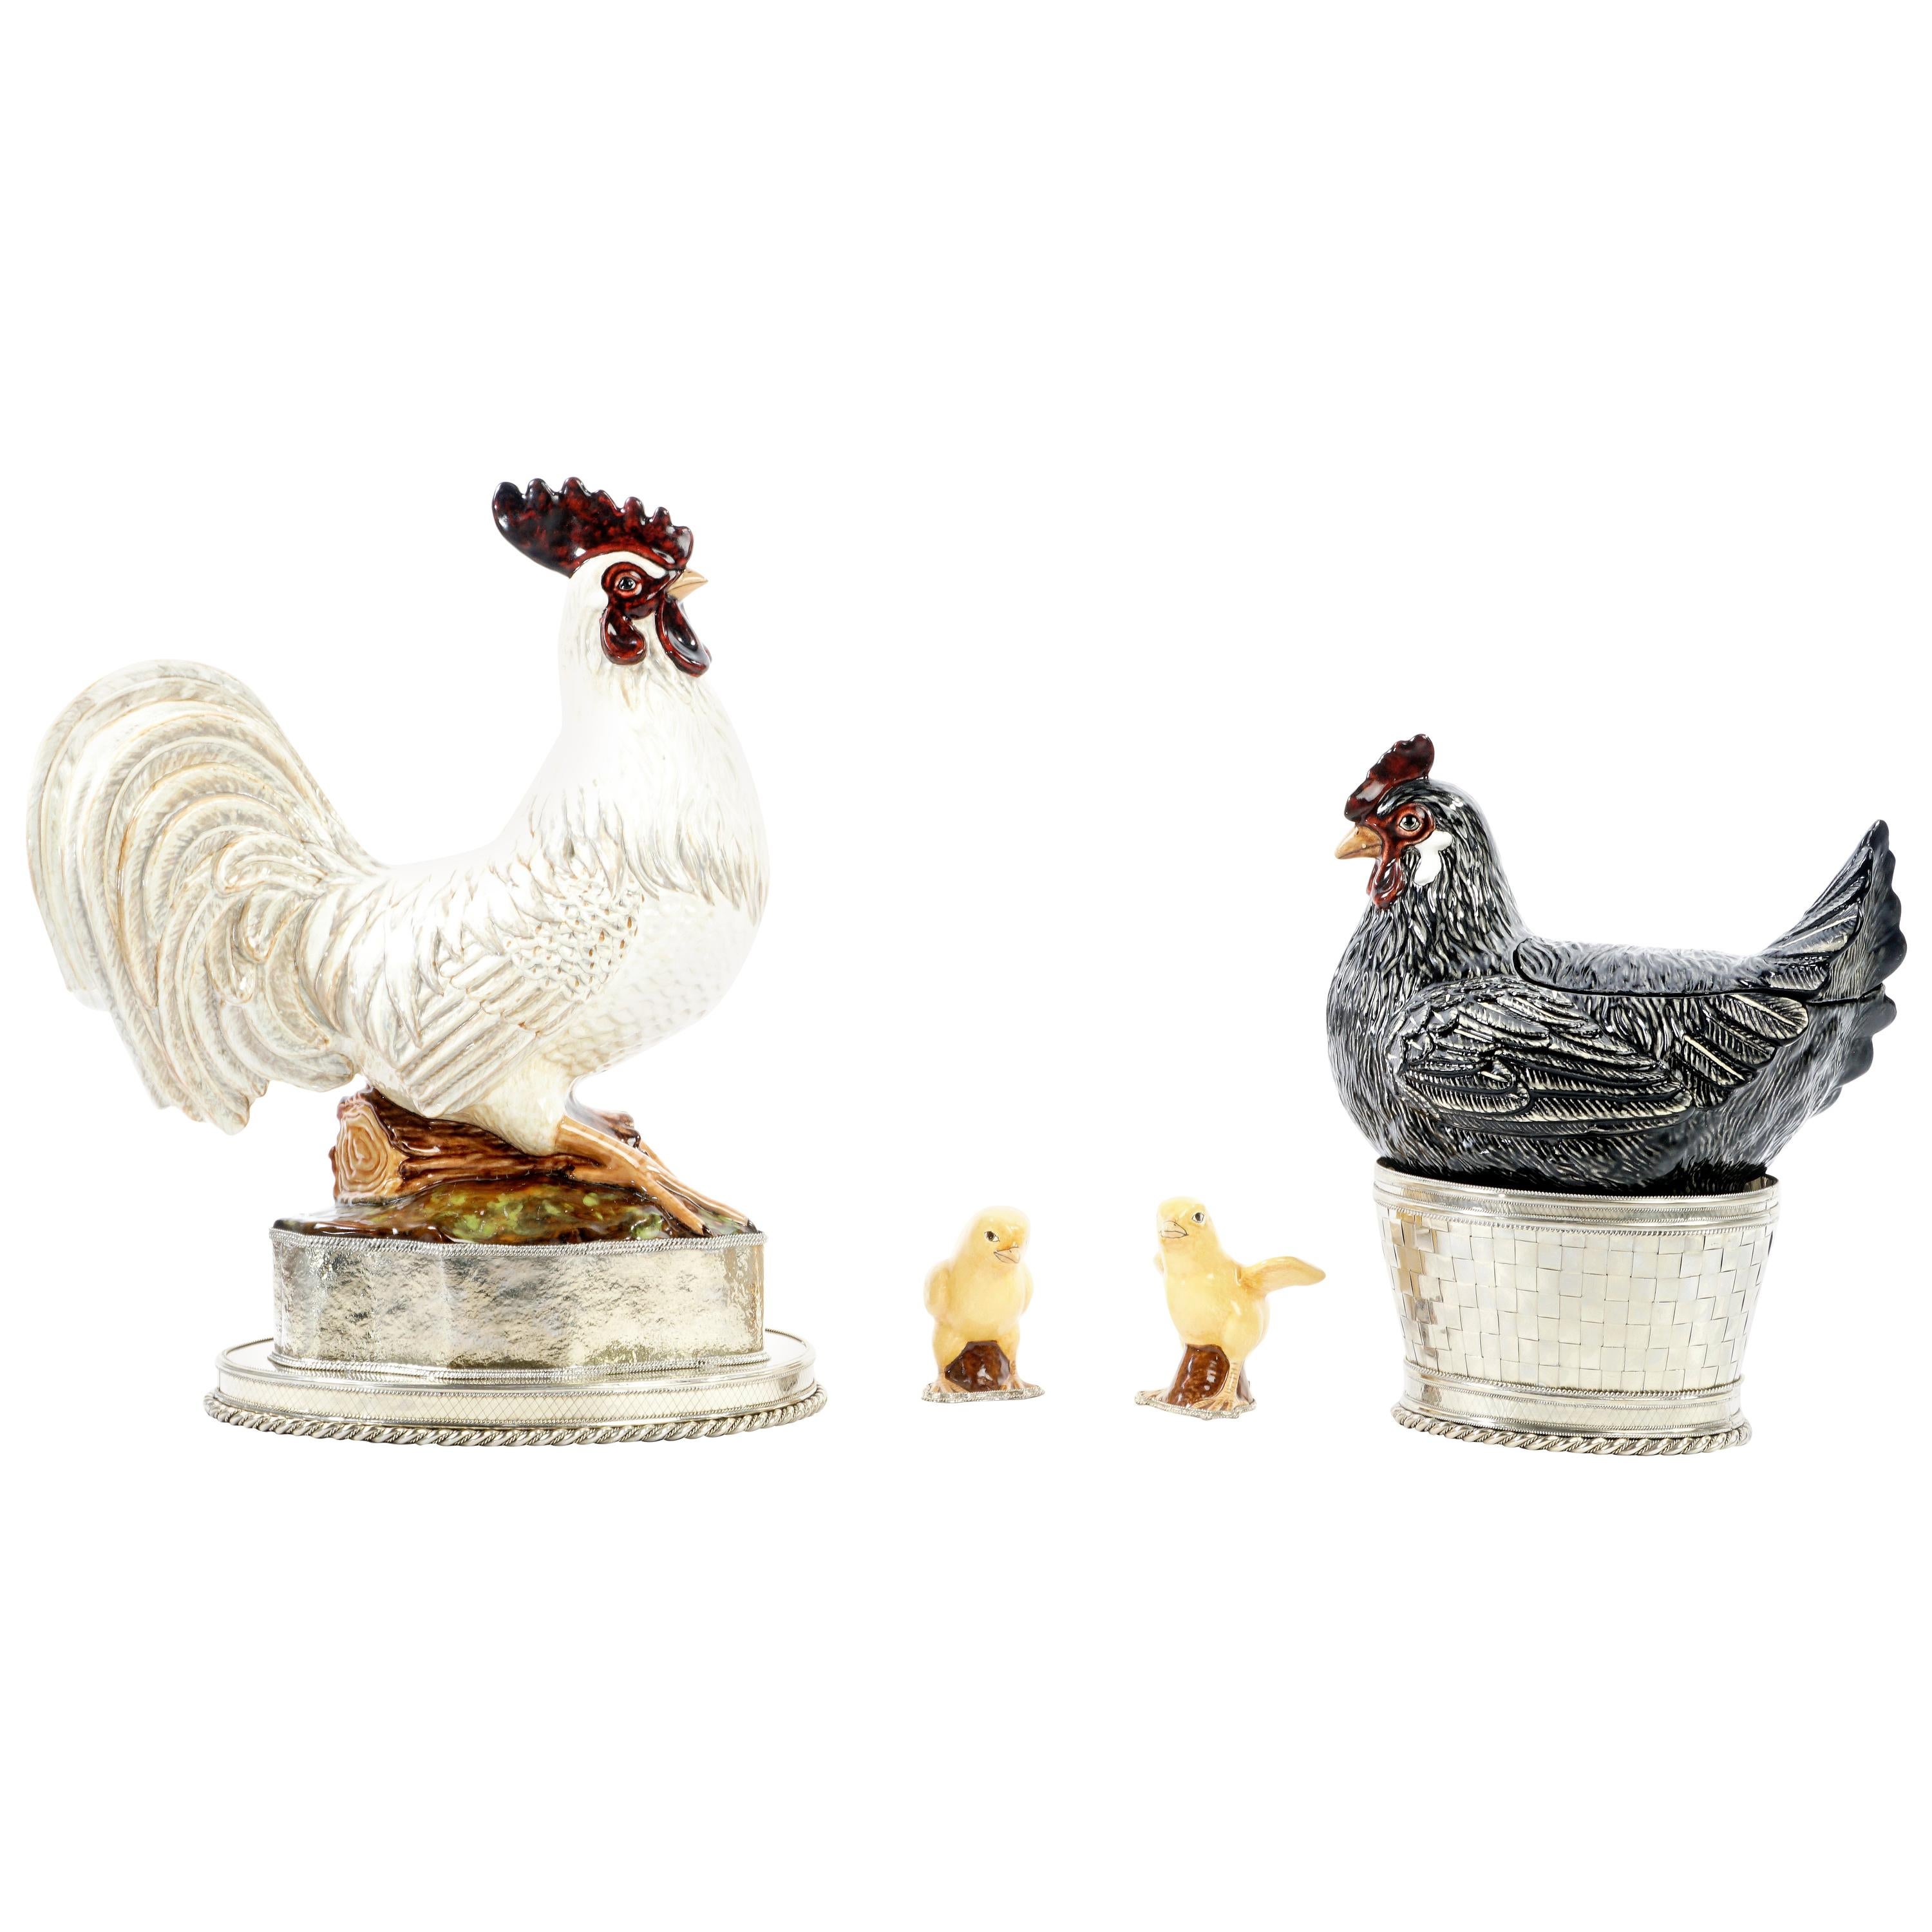 Chicken, Rooster and Chicks, Ceramic and White Metal 'Alpaca'